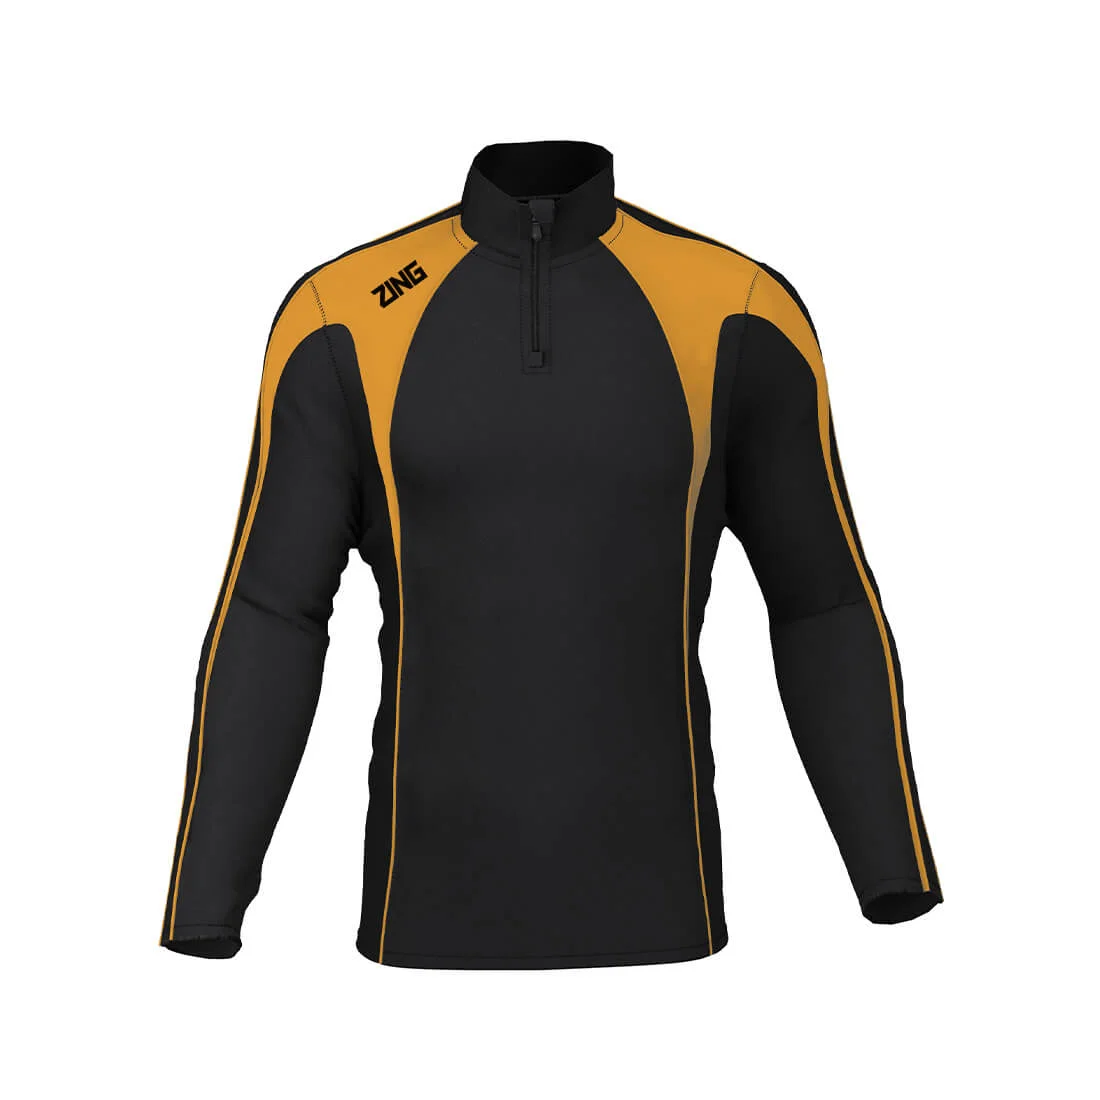 ZING Sportswear Premier Midlayer | Training Kit and Teamwear - front Amber and Black